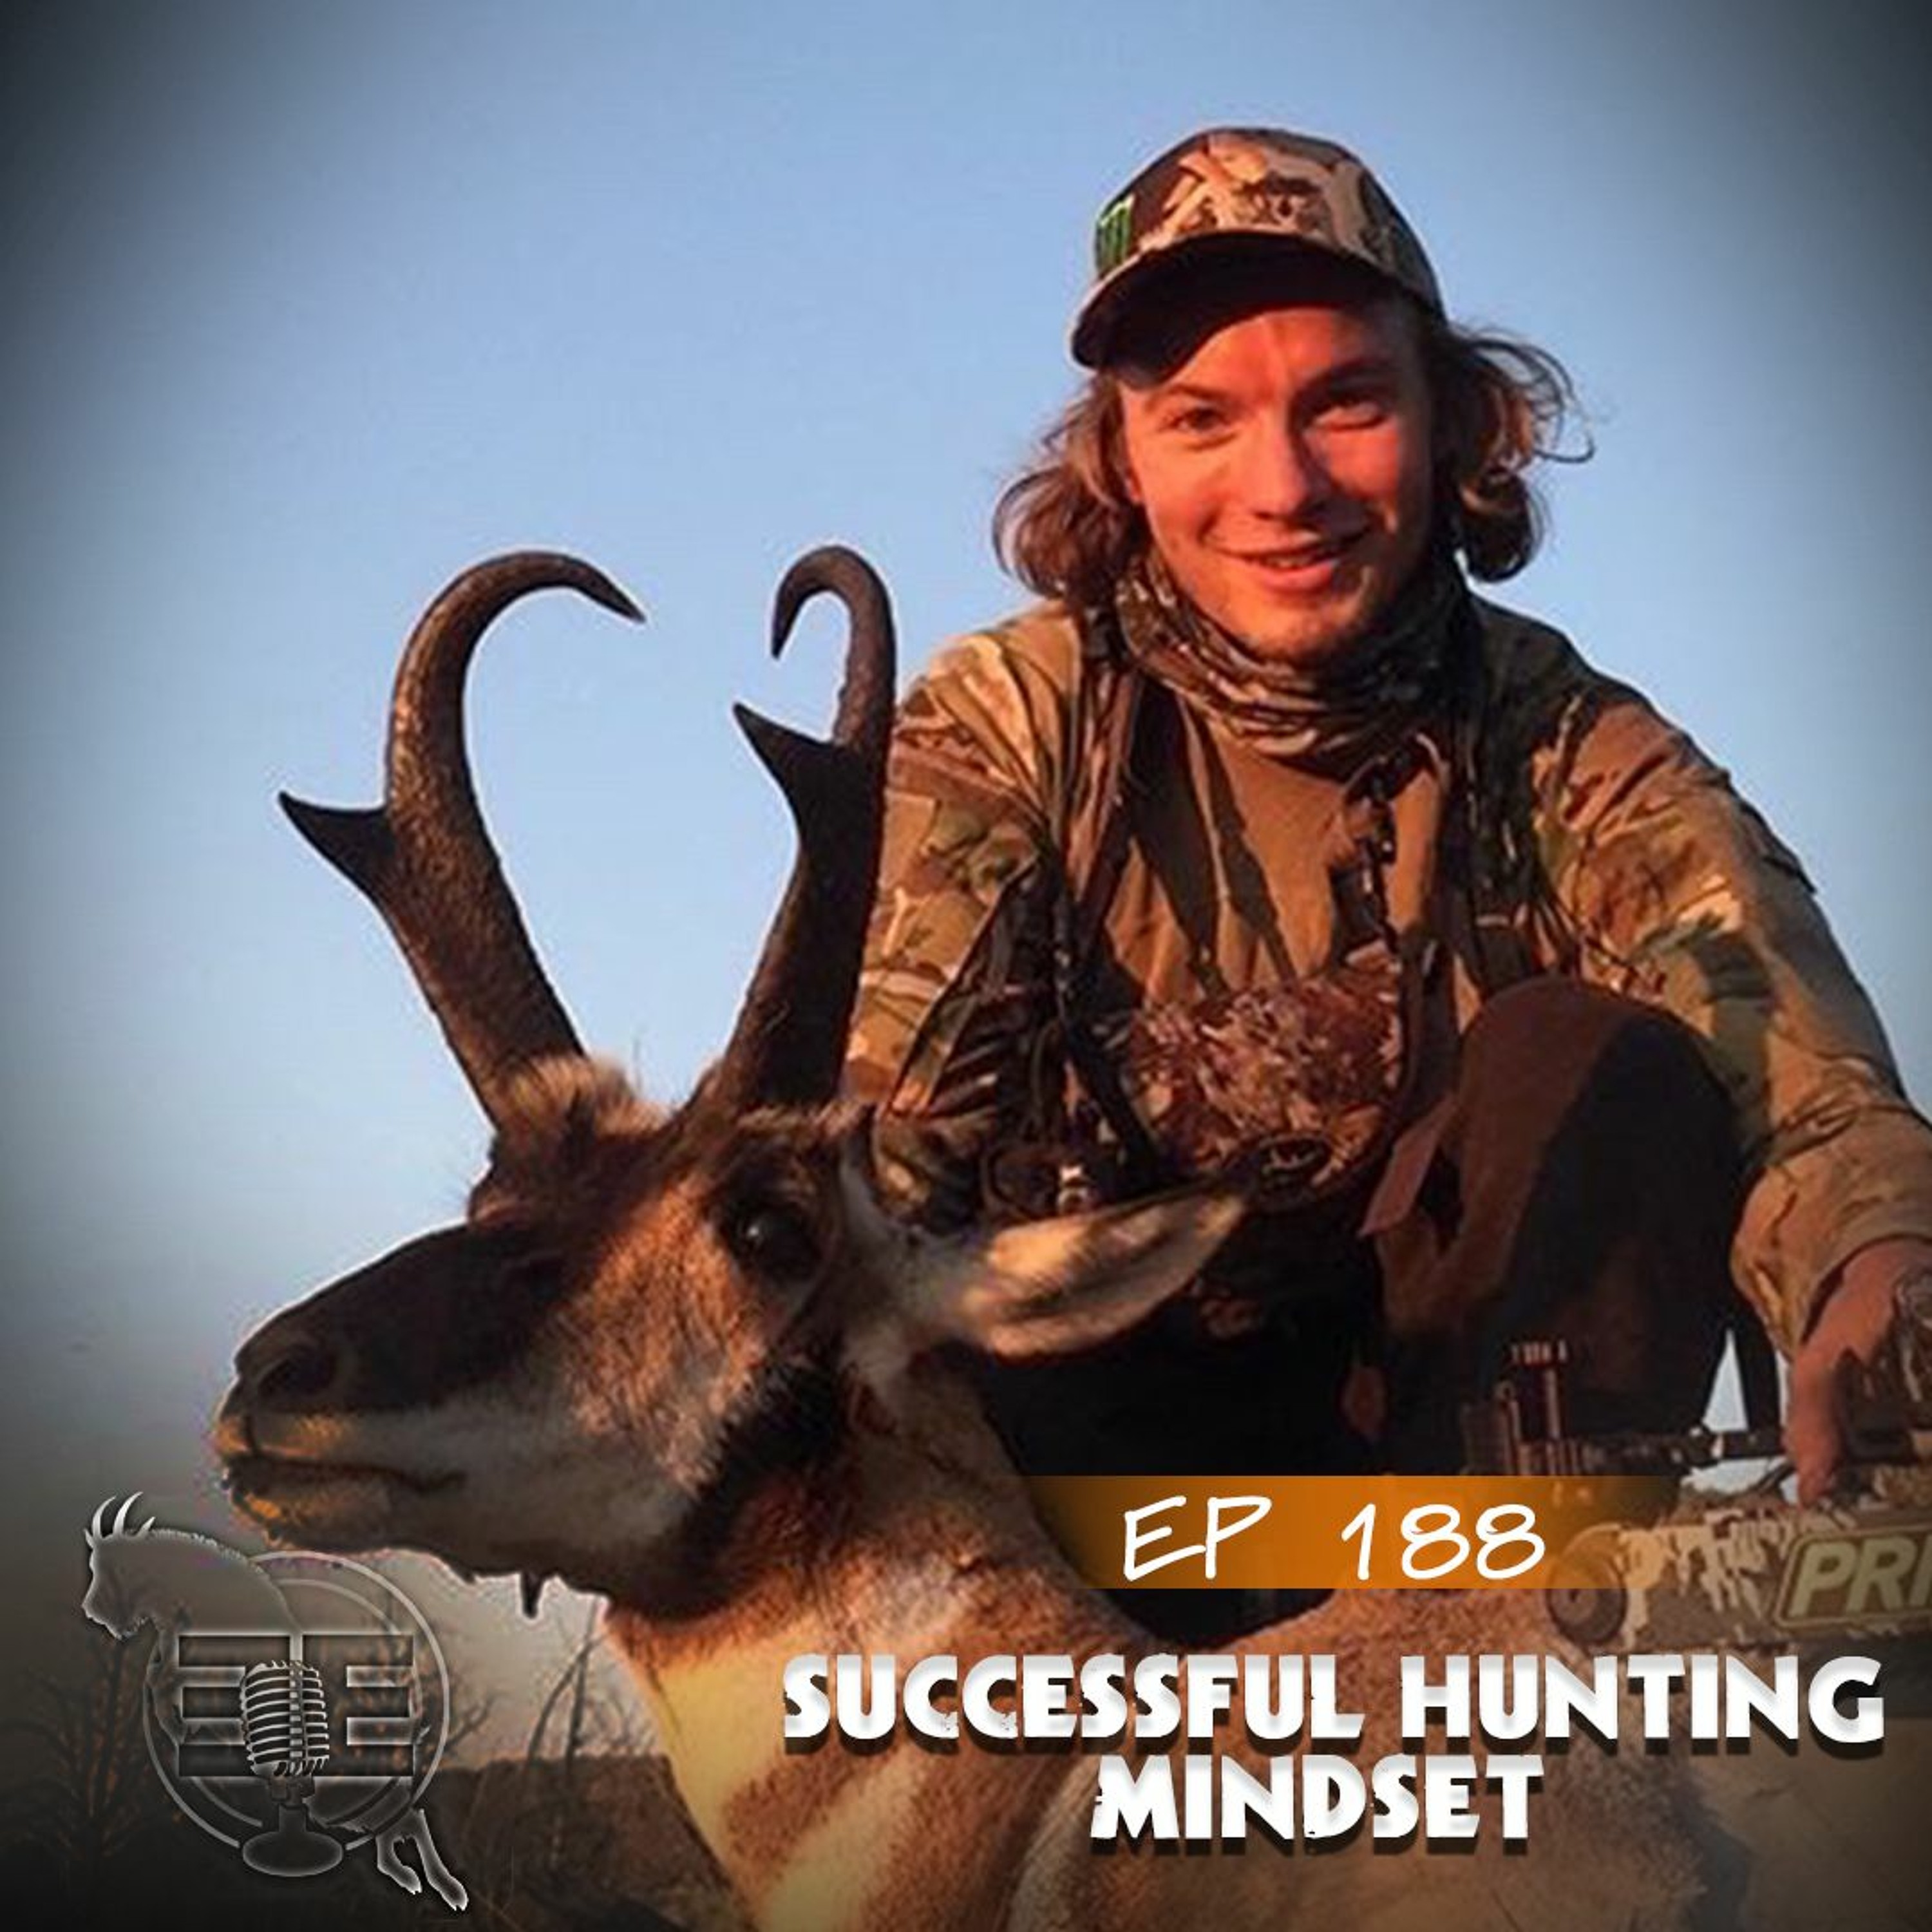 Episode 188: Having A Successful Hunter’s Mindset with David Wise